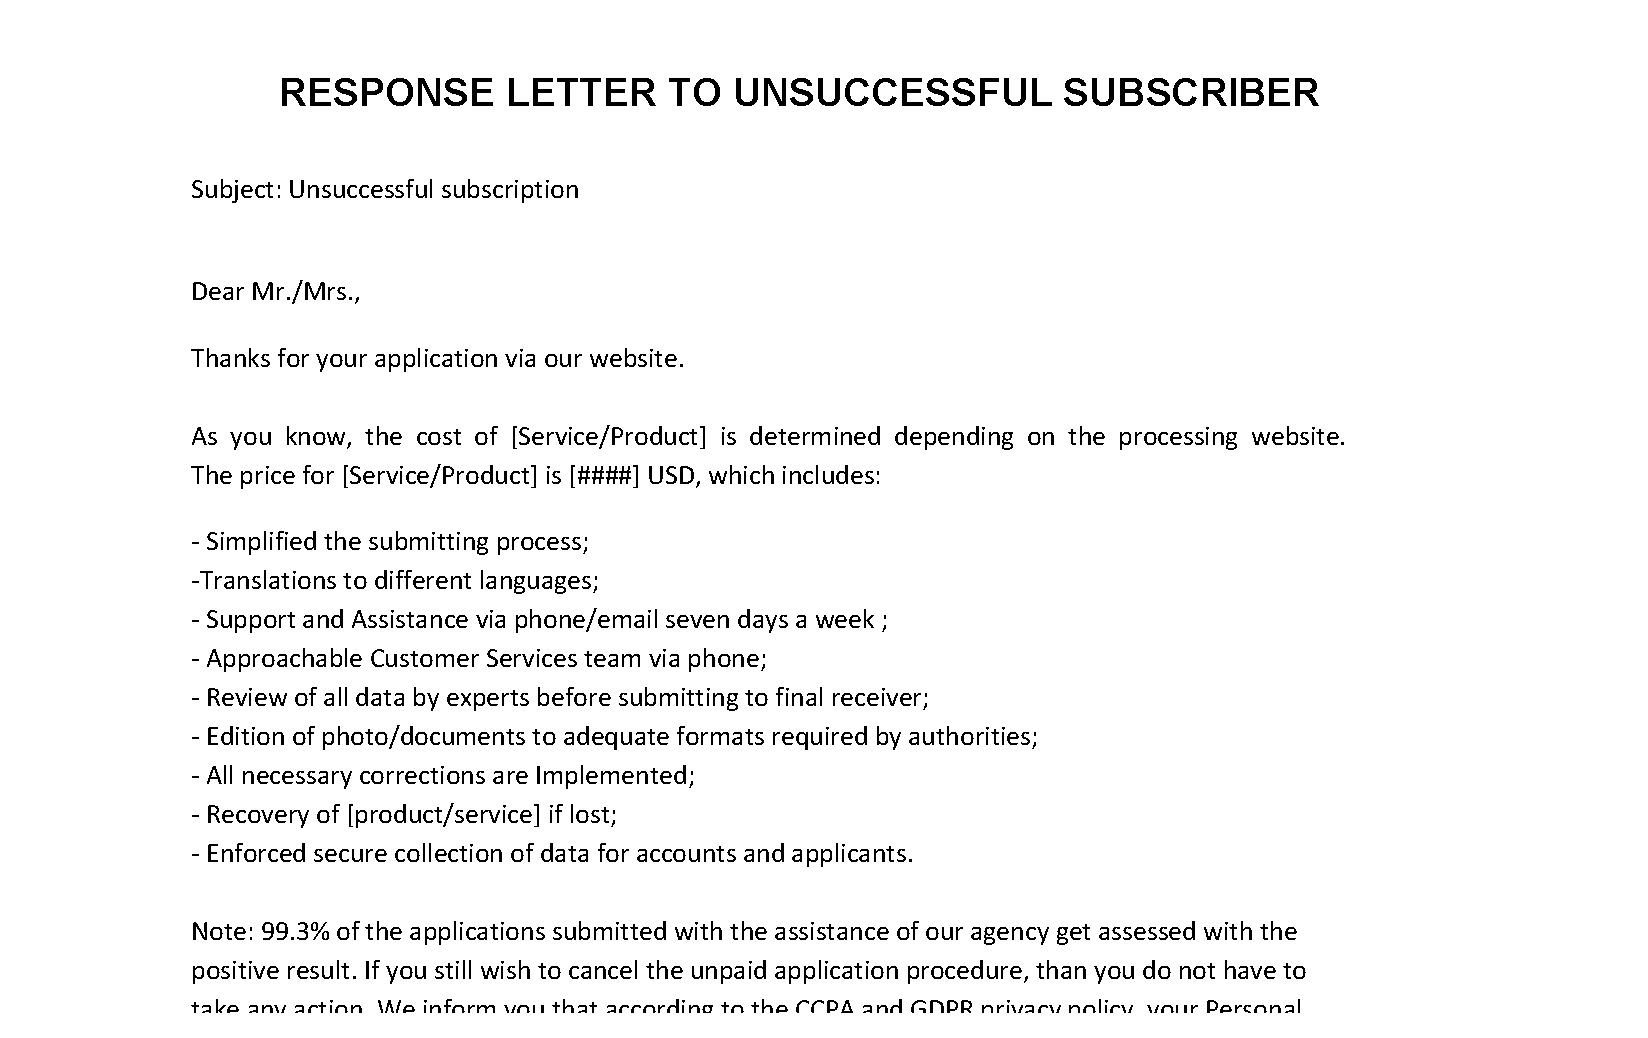 ccpa response letter to unsuccessful subscriber voorbeeld afbeelding 